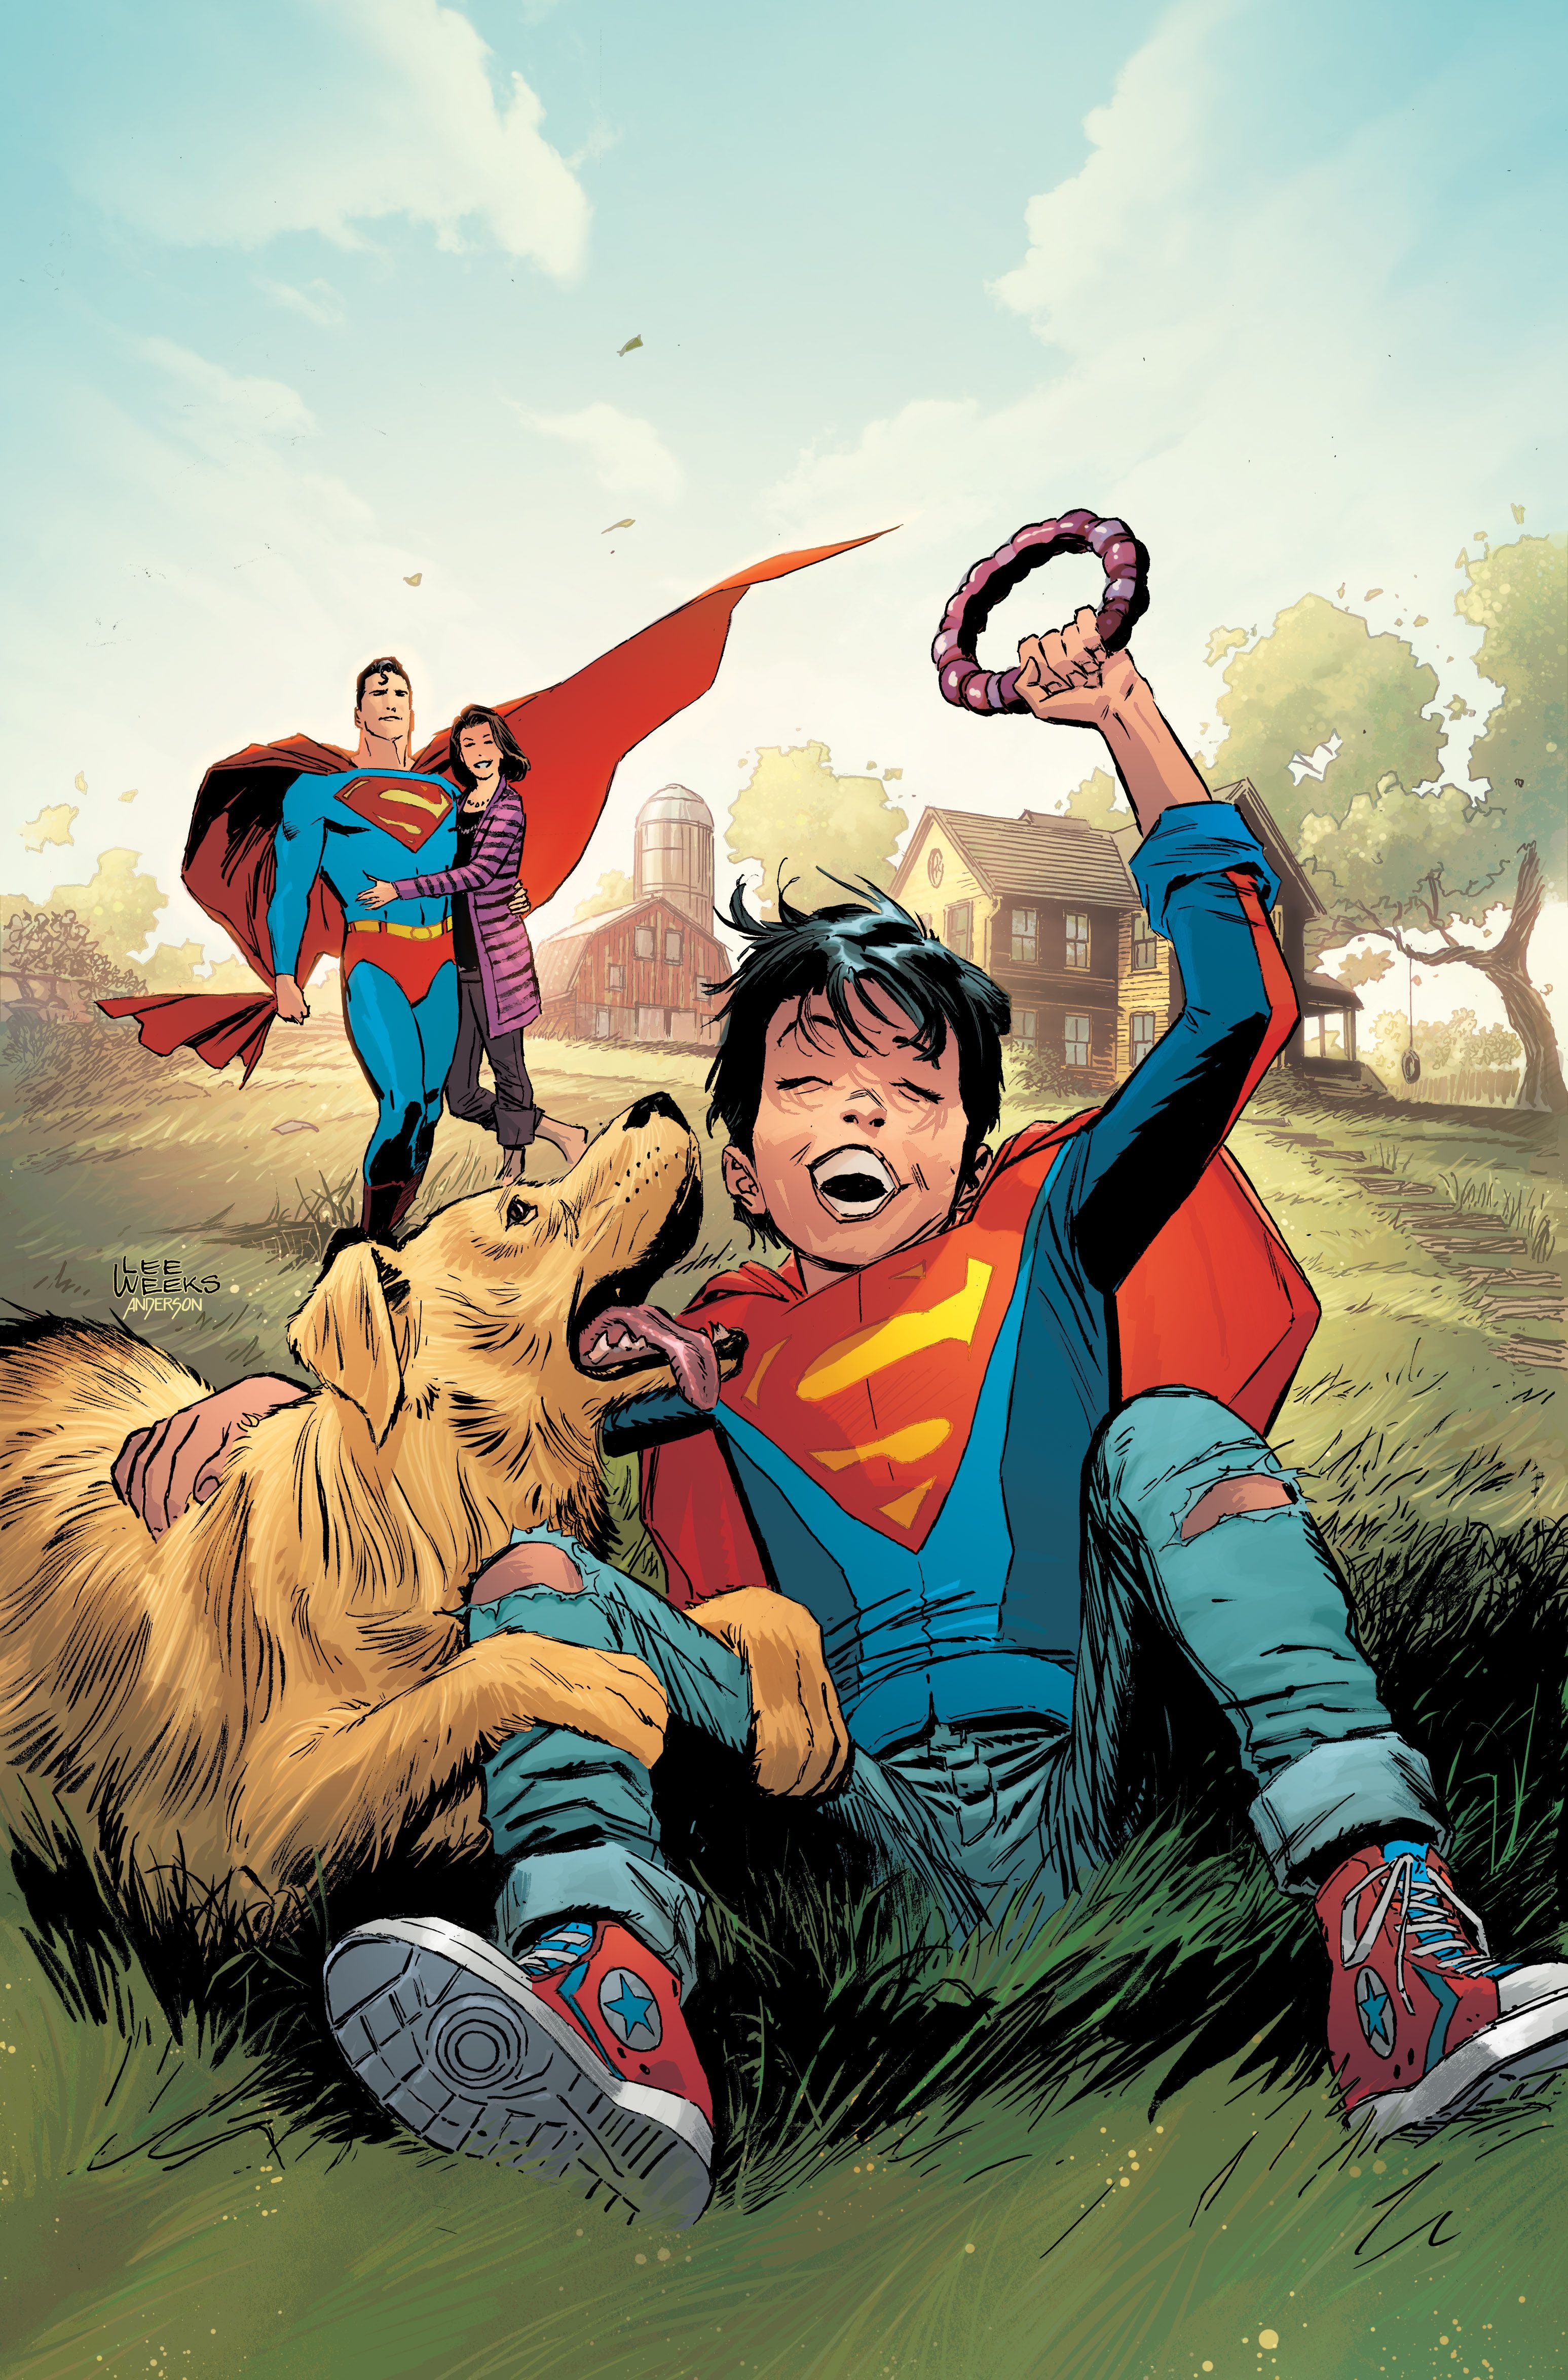 Action Comics 1050 Open to Order Variant (Weeks)